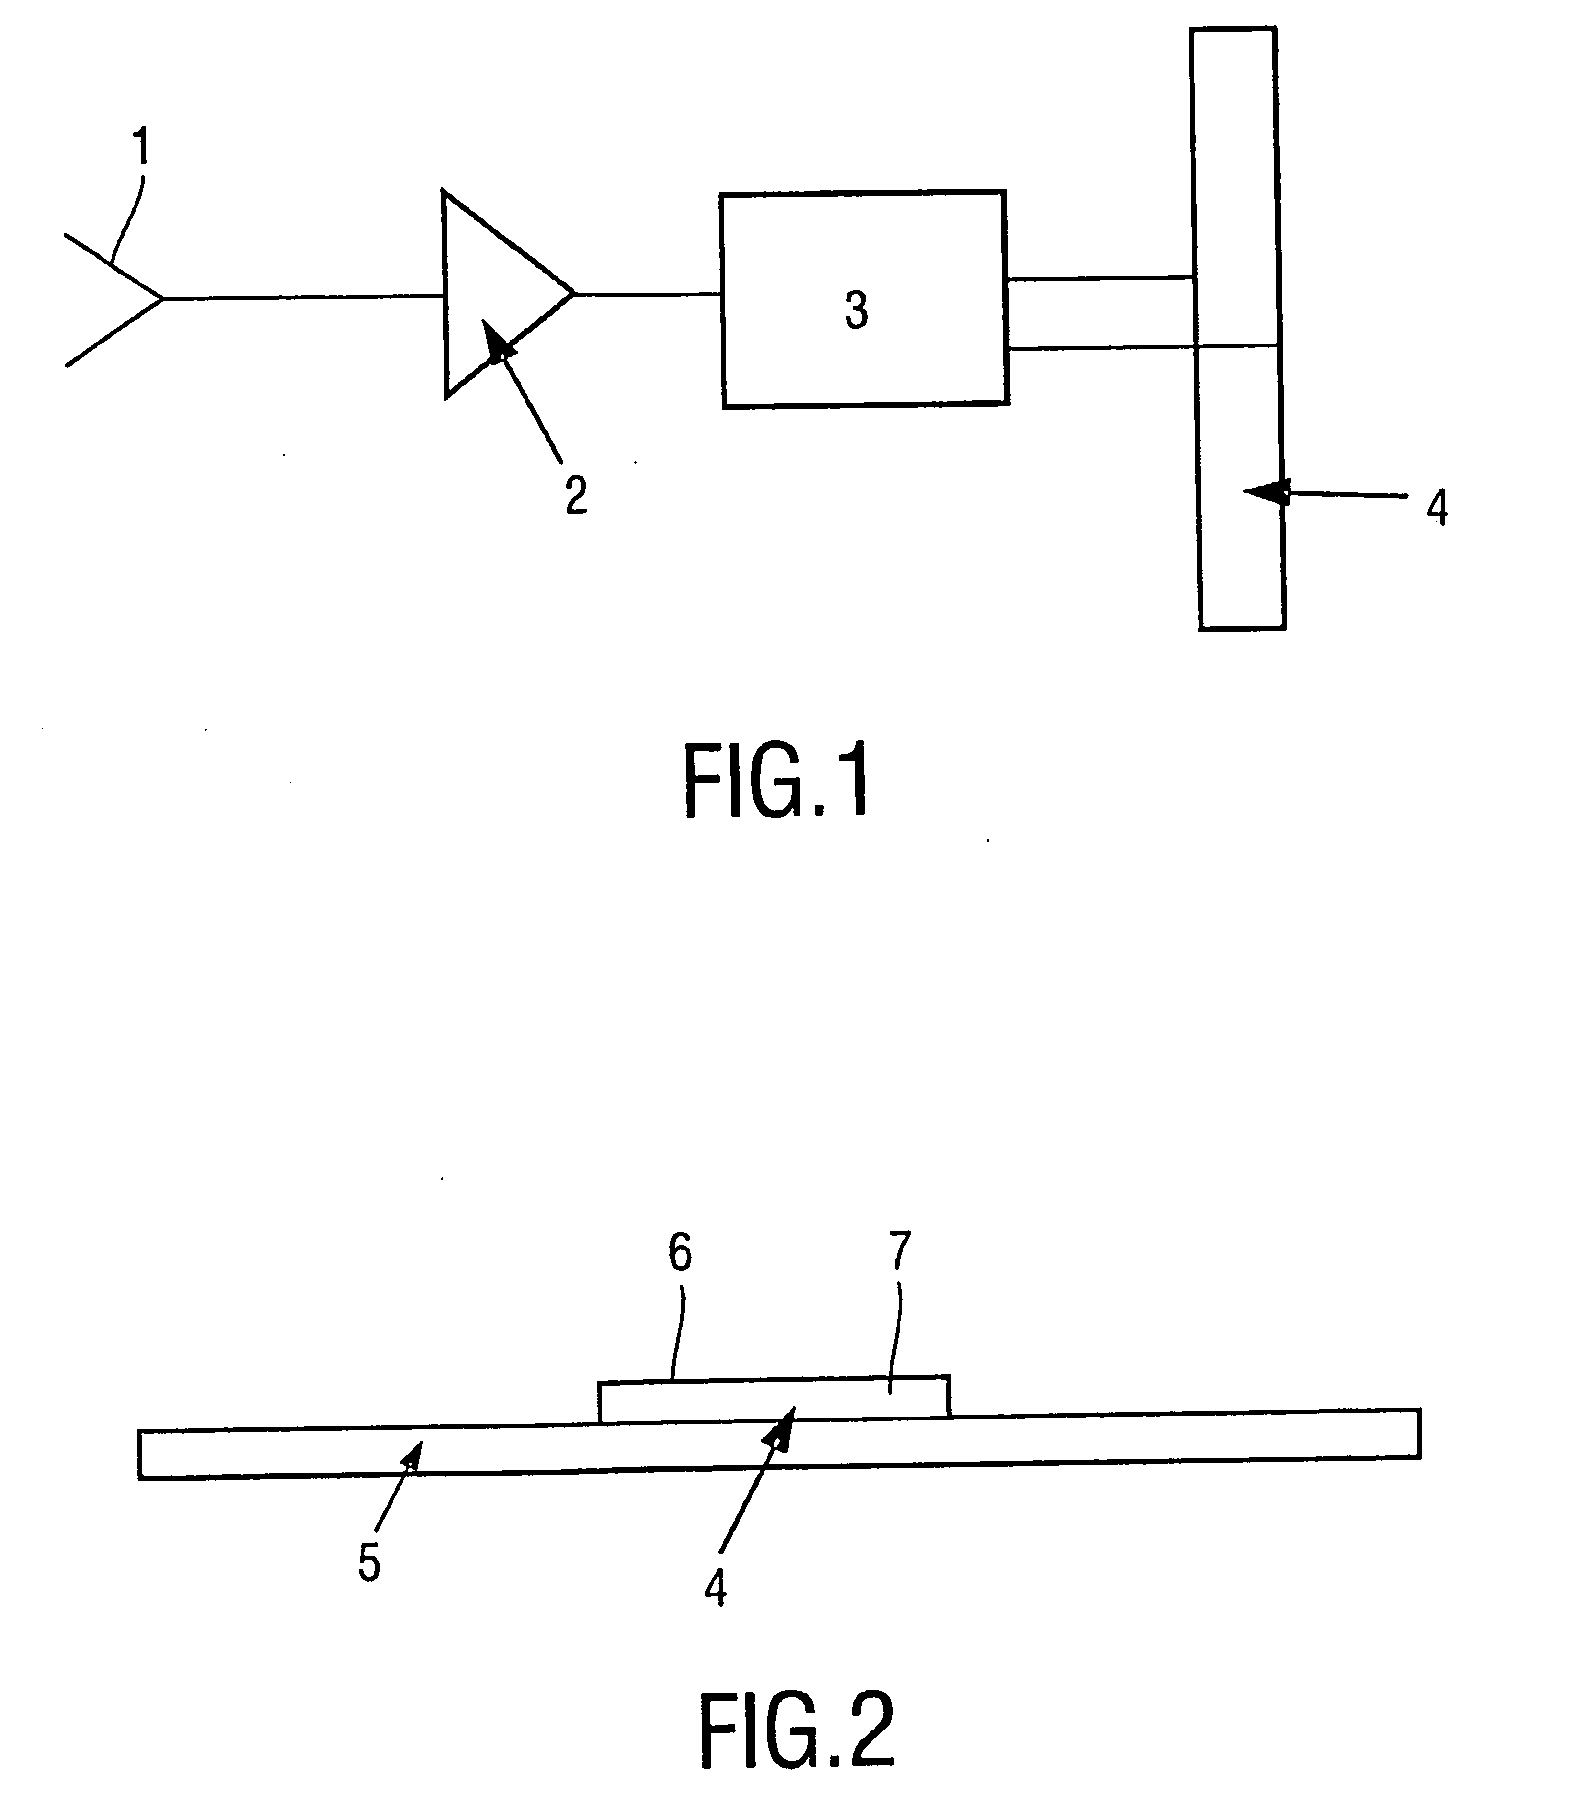 Panel-acoustic transducer comprising an actuator for actuating a panel, and sound-generating and/or recording device